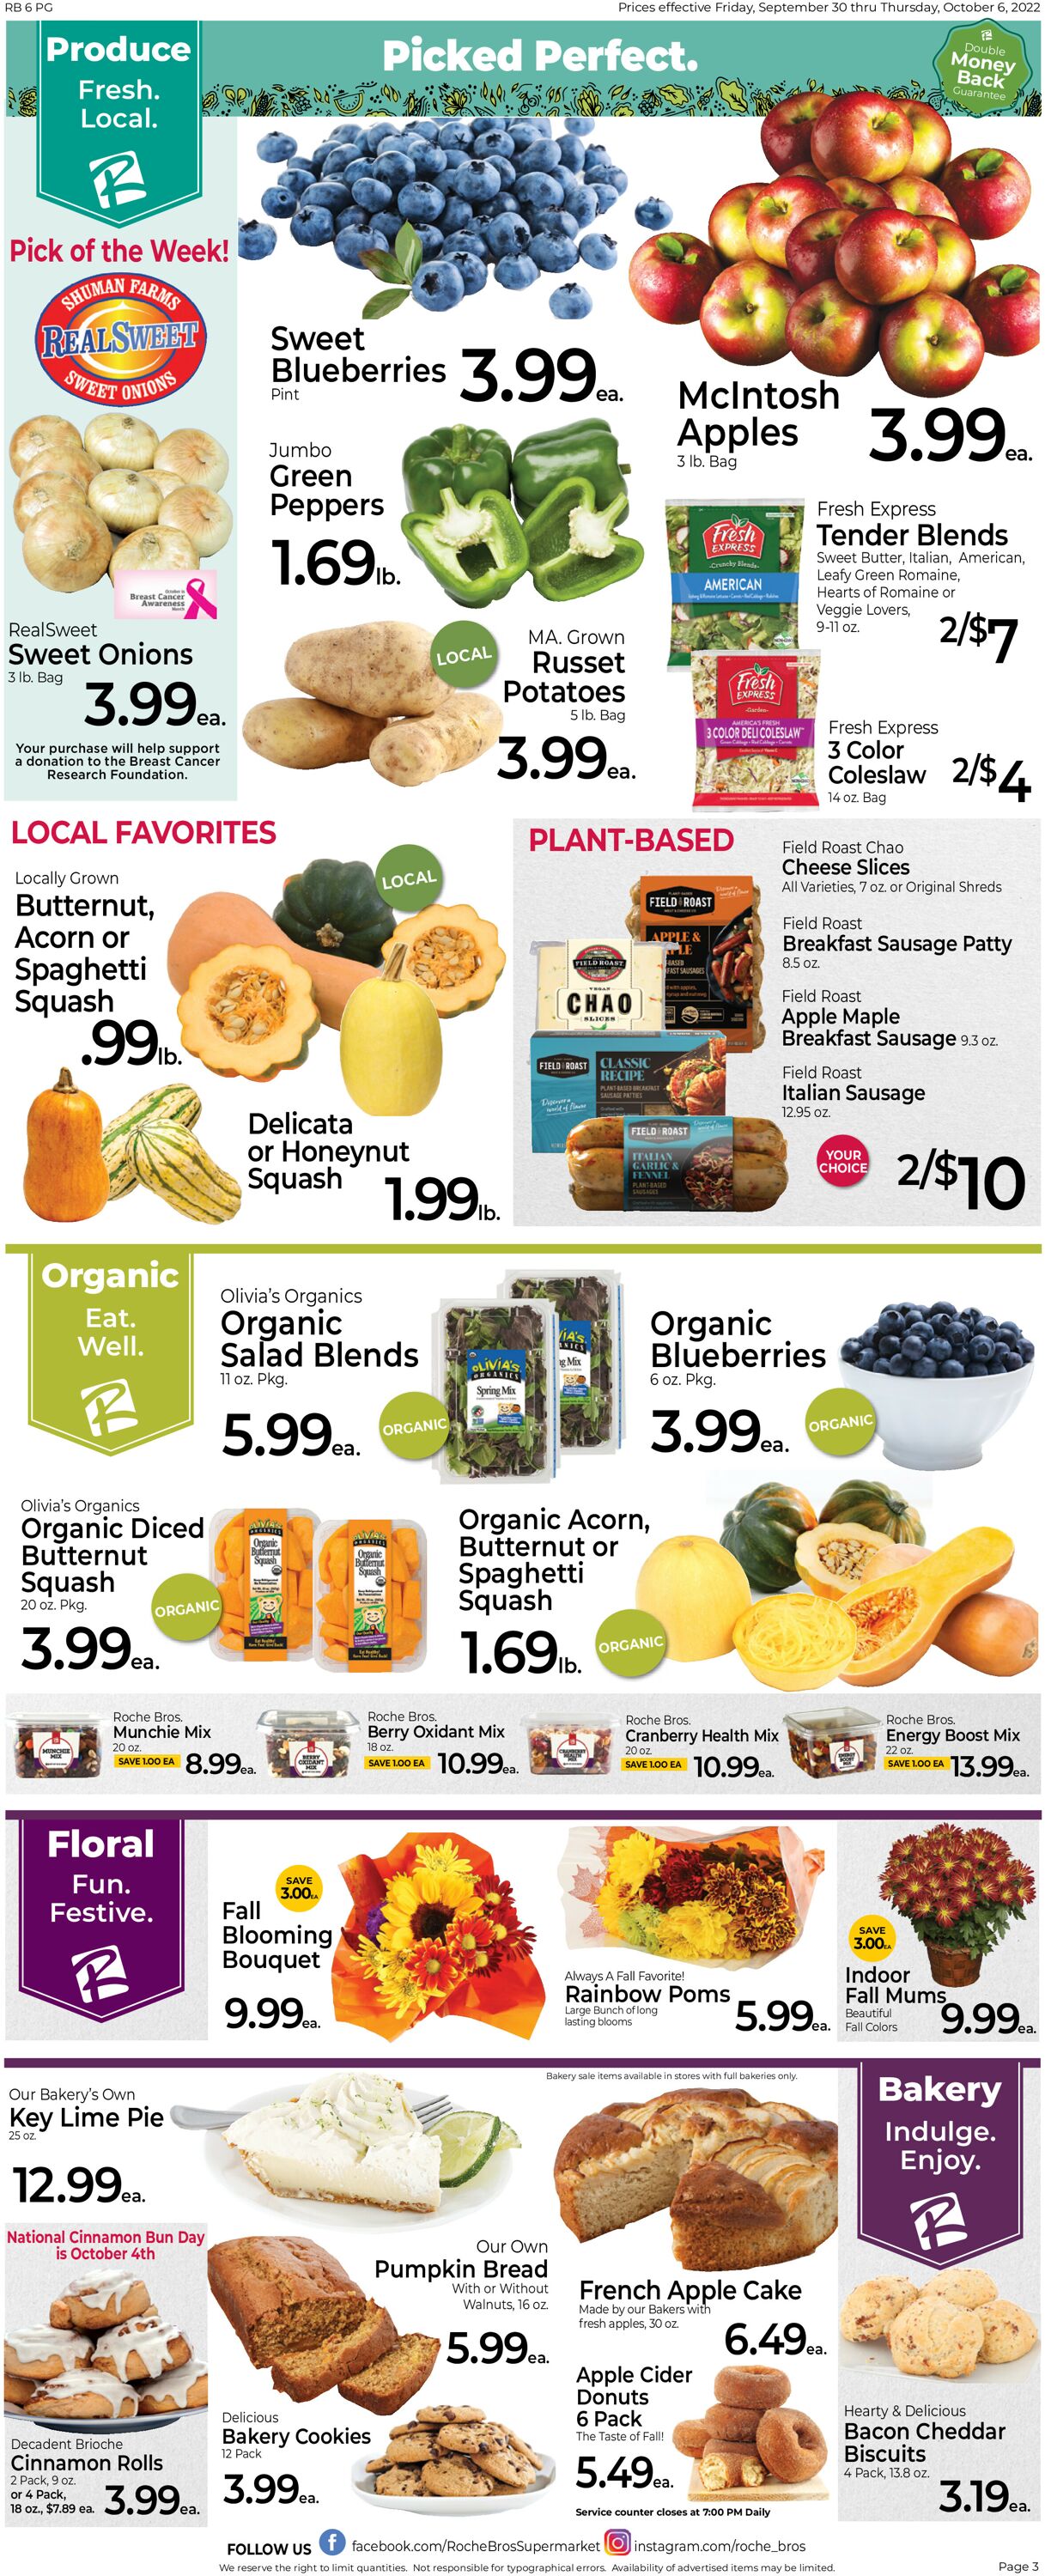 Catalogue Roche Bros. Supermarkets from 09/30/2022